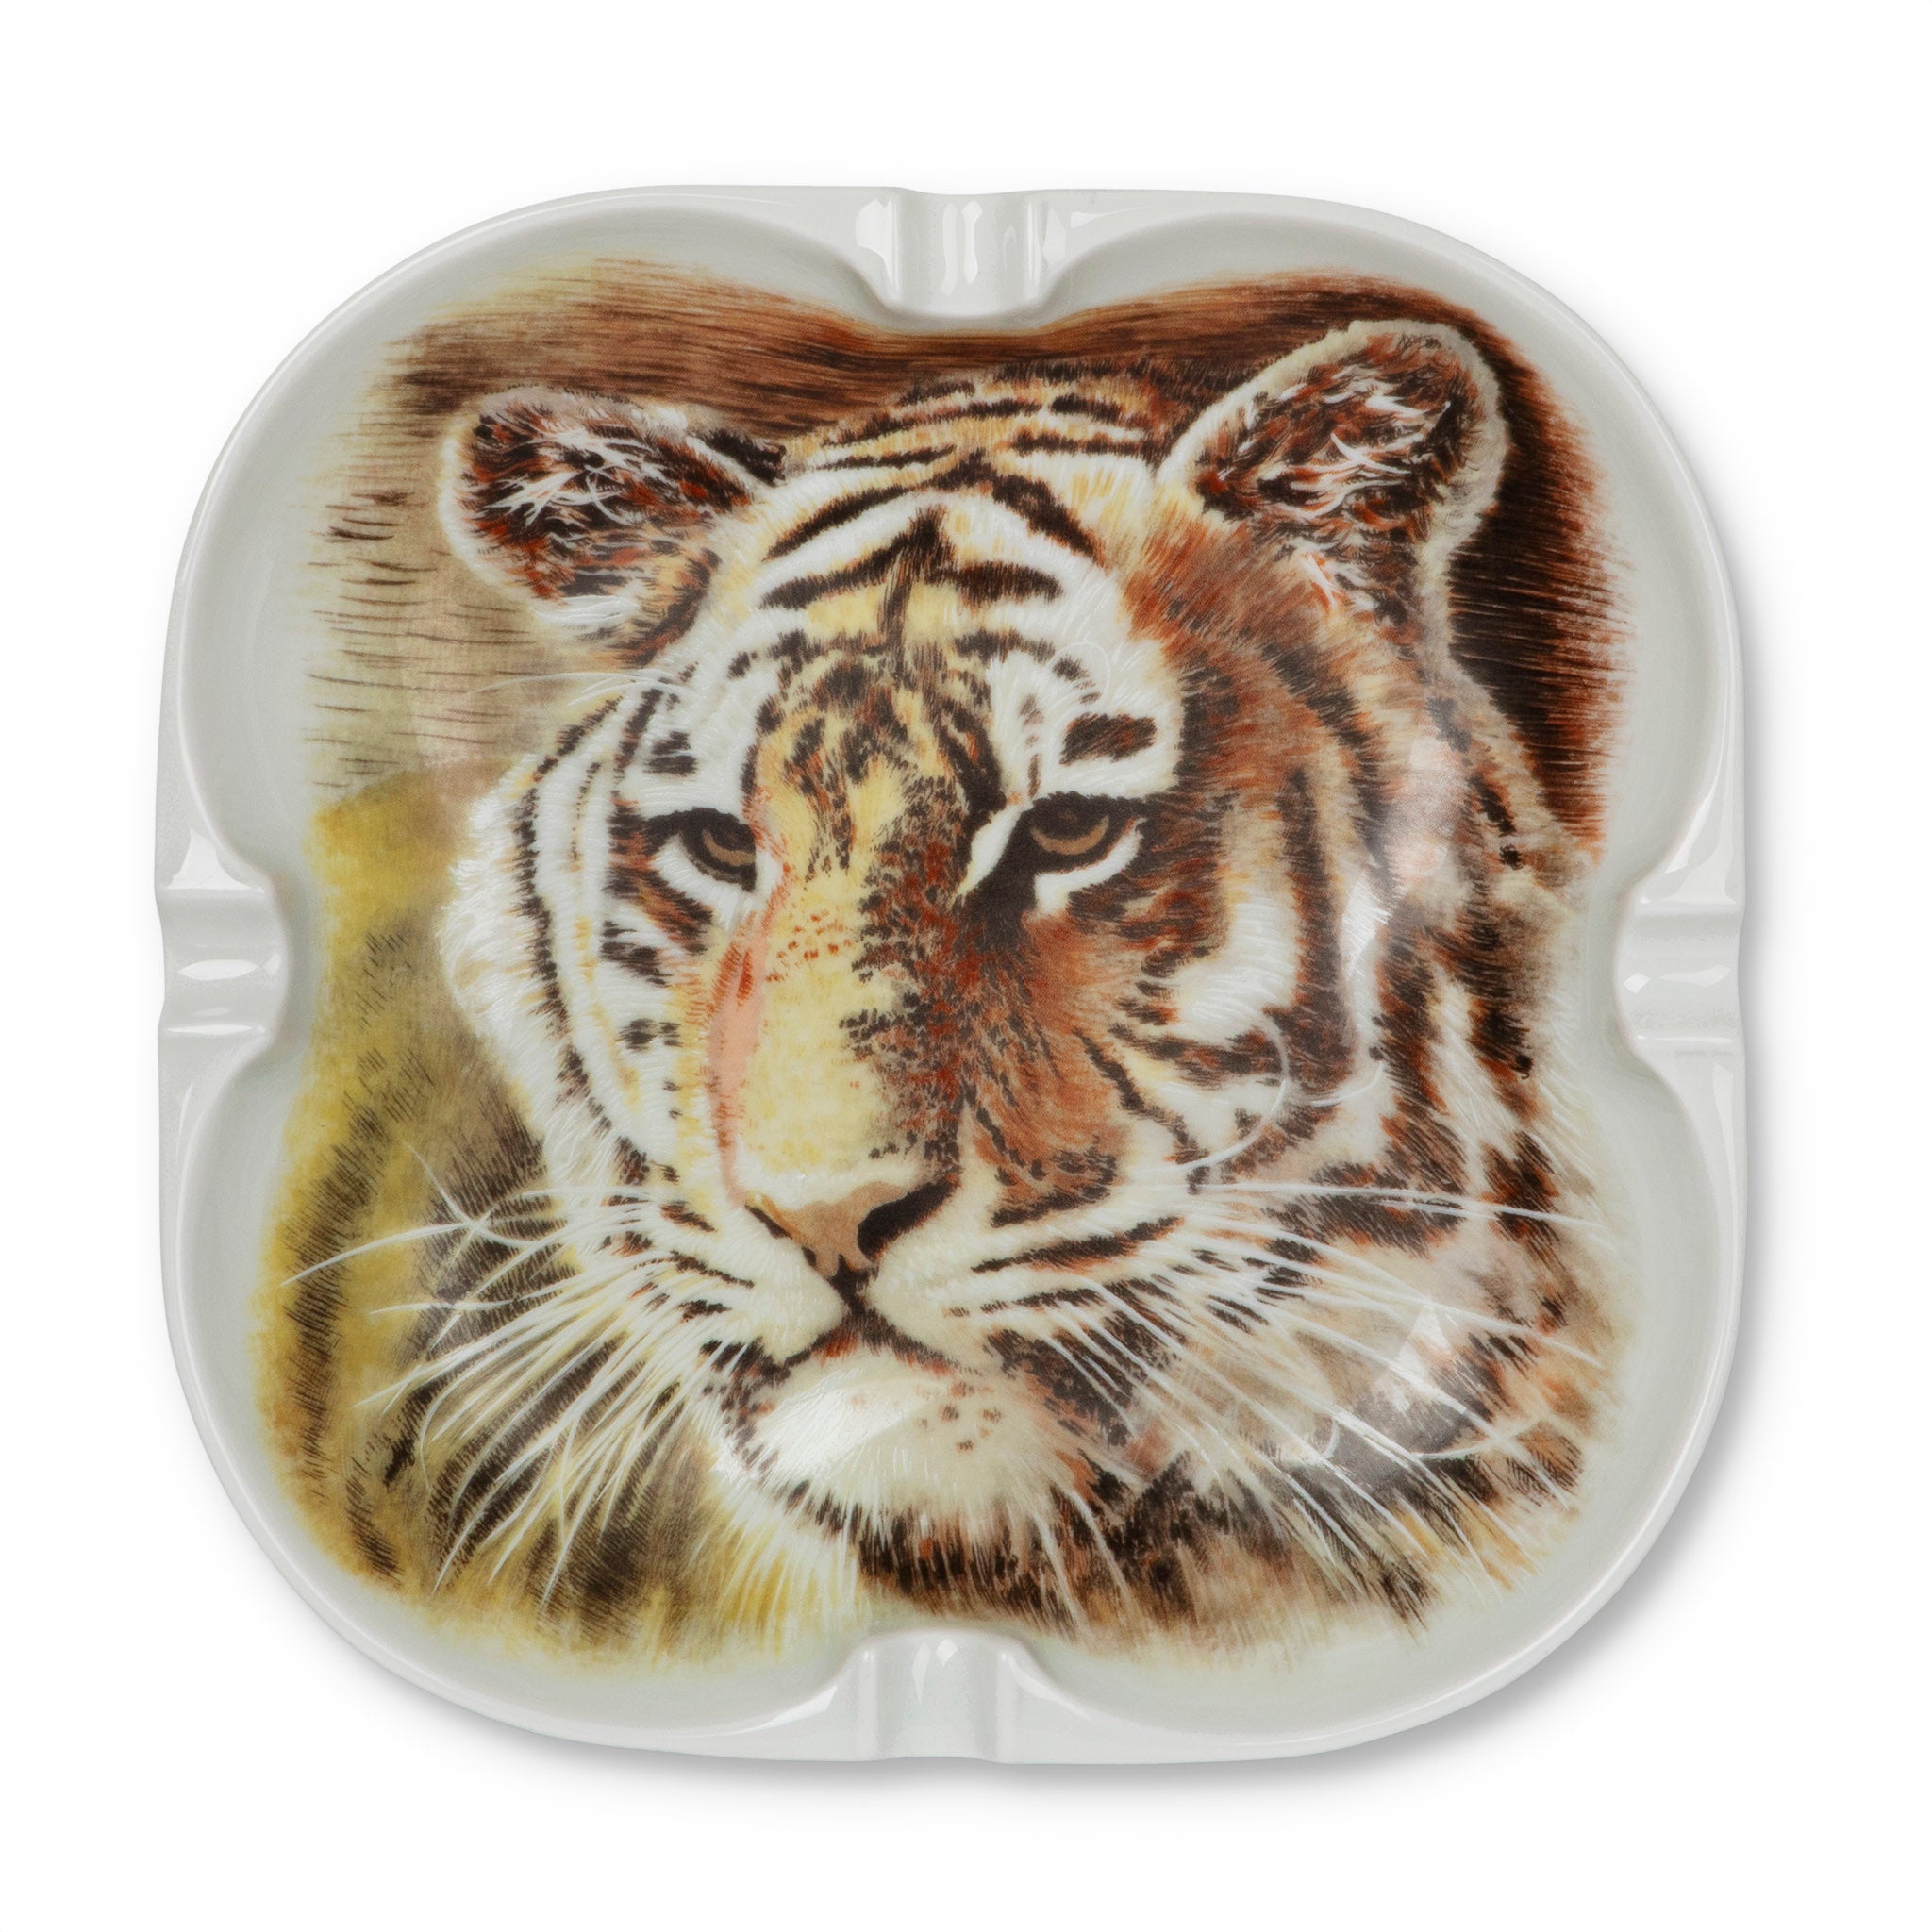 Vintage Abercrombie & Fitch Tiger Ashtray